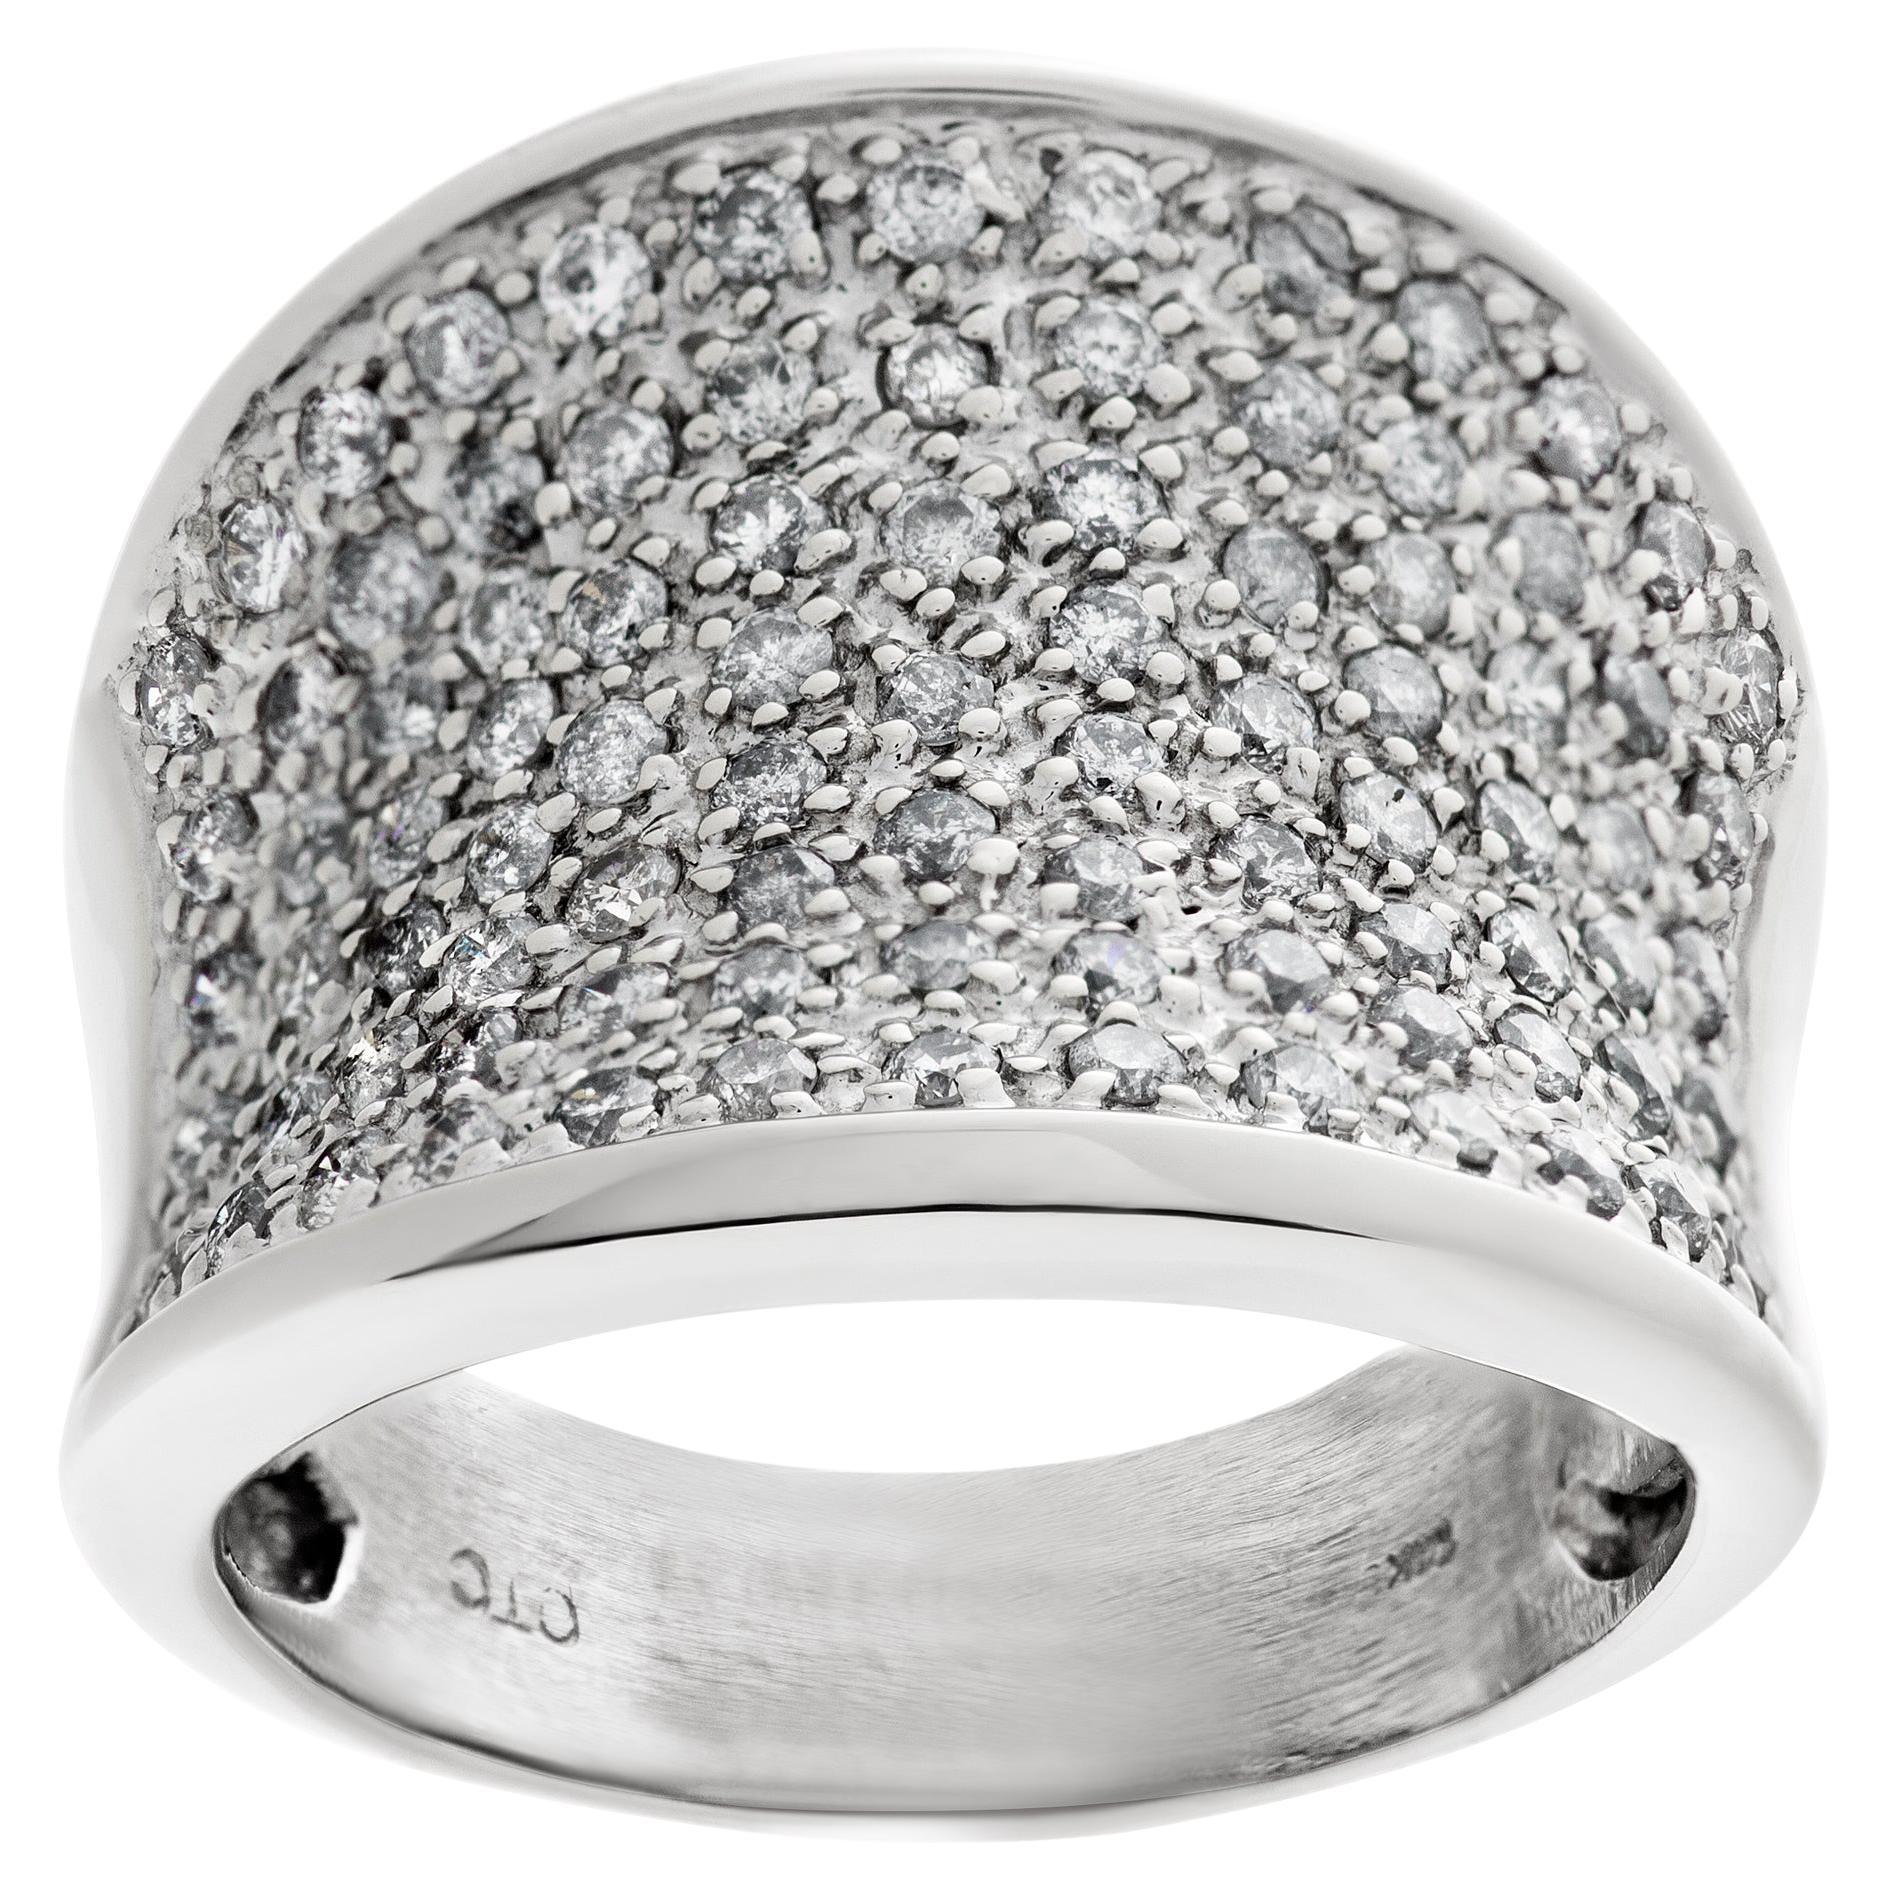 Pave diamond wide ring in 14k white gold